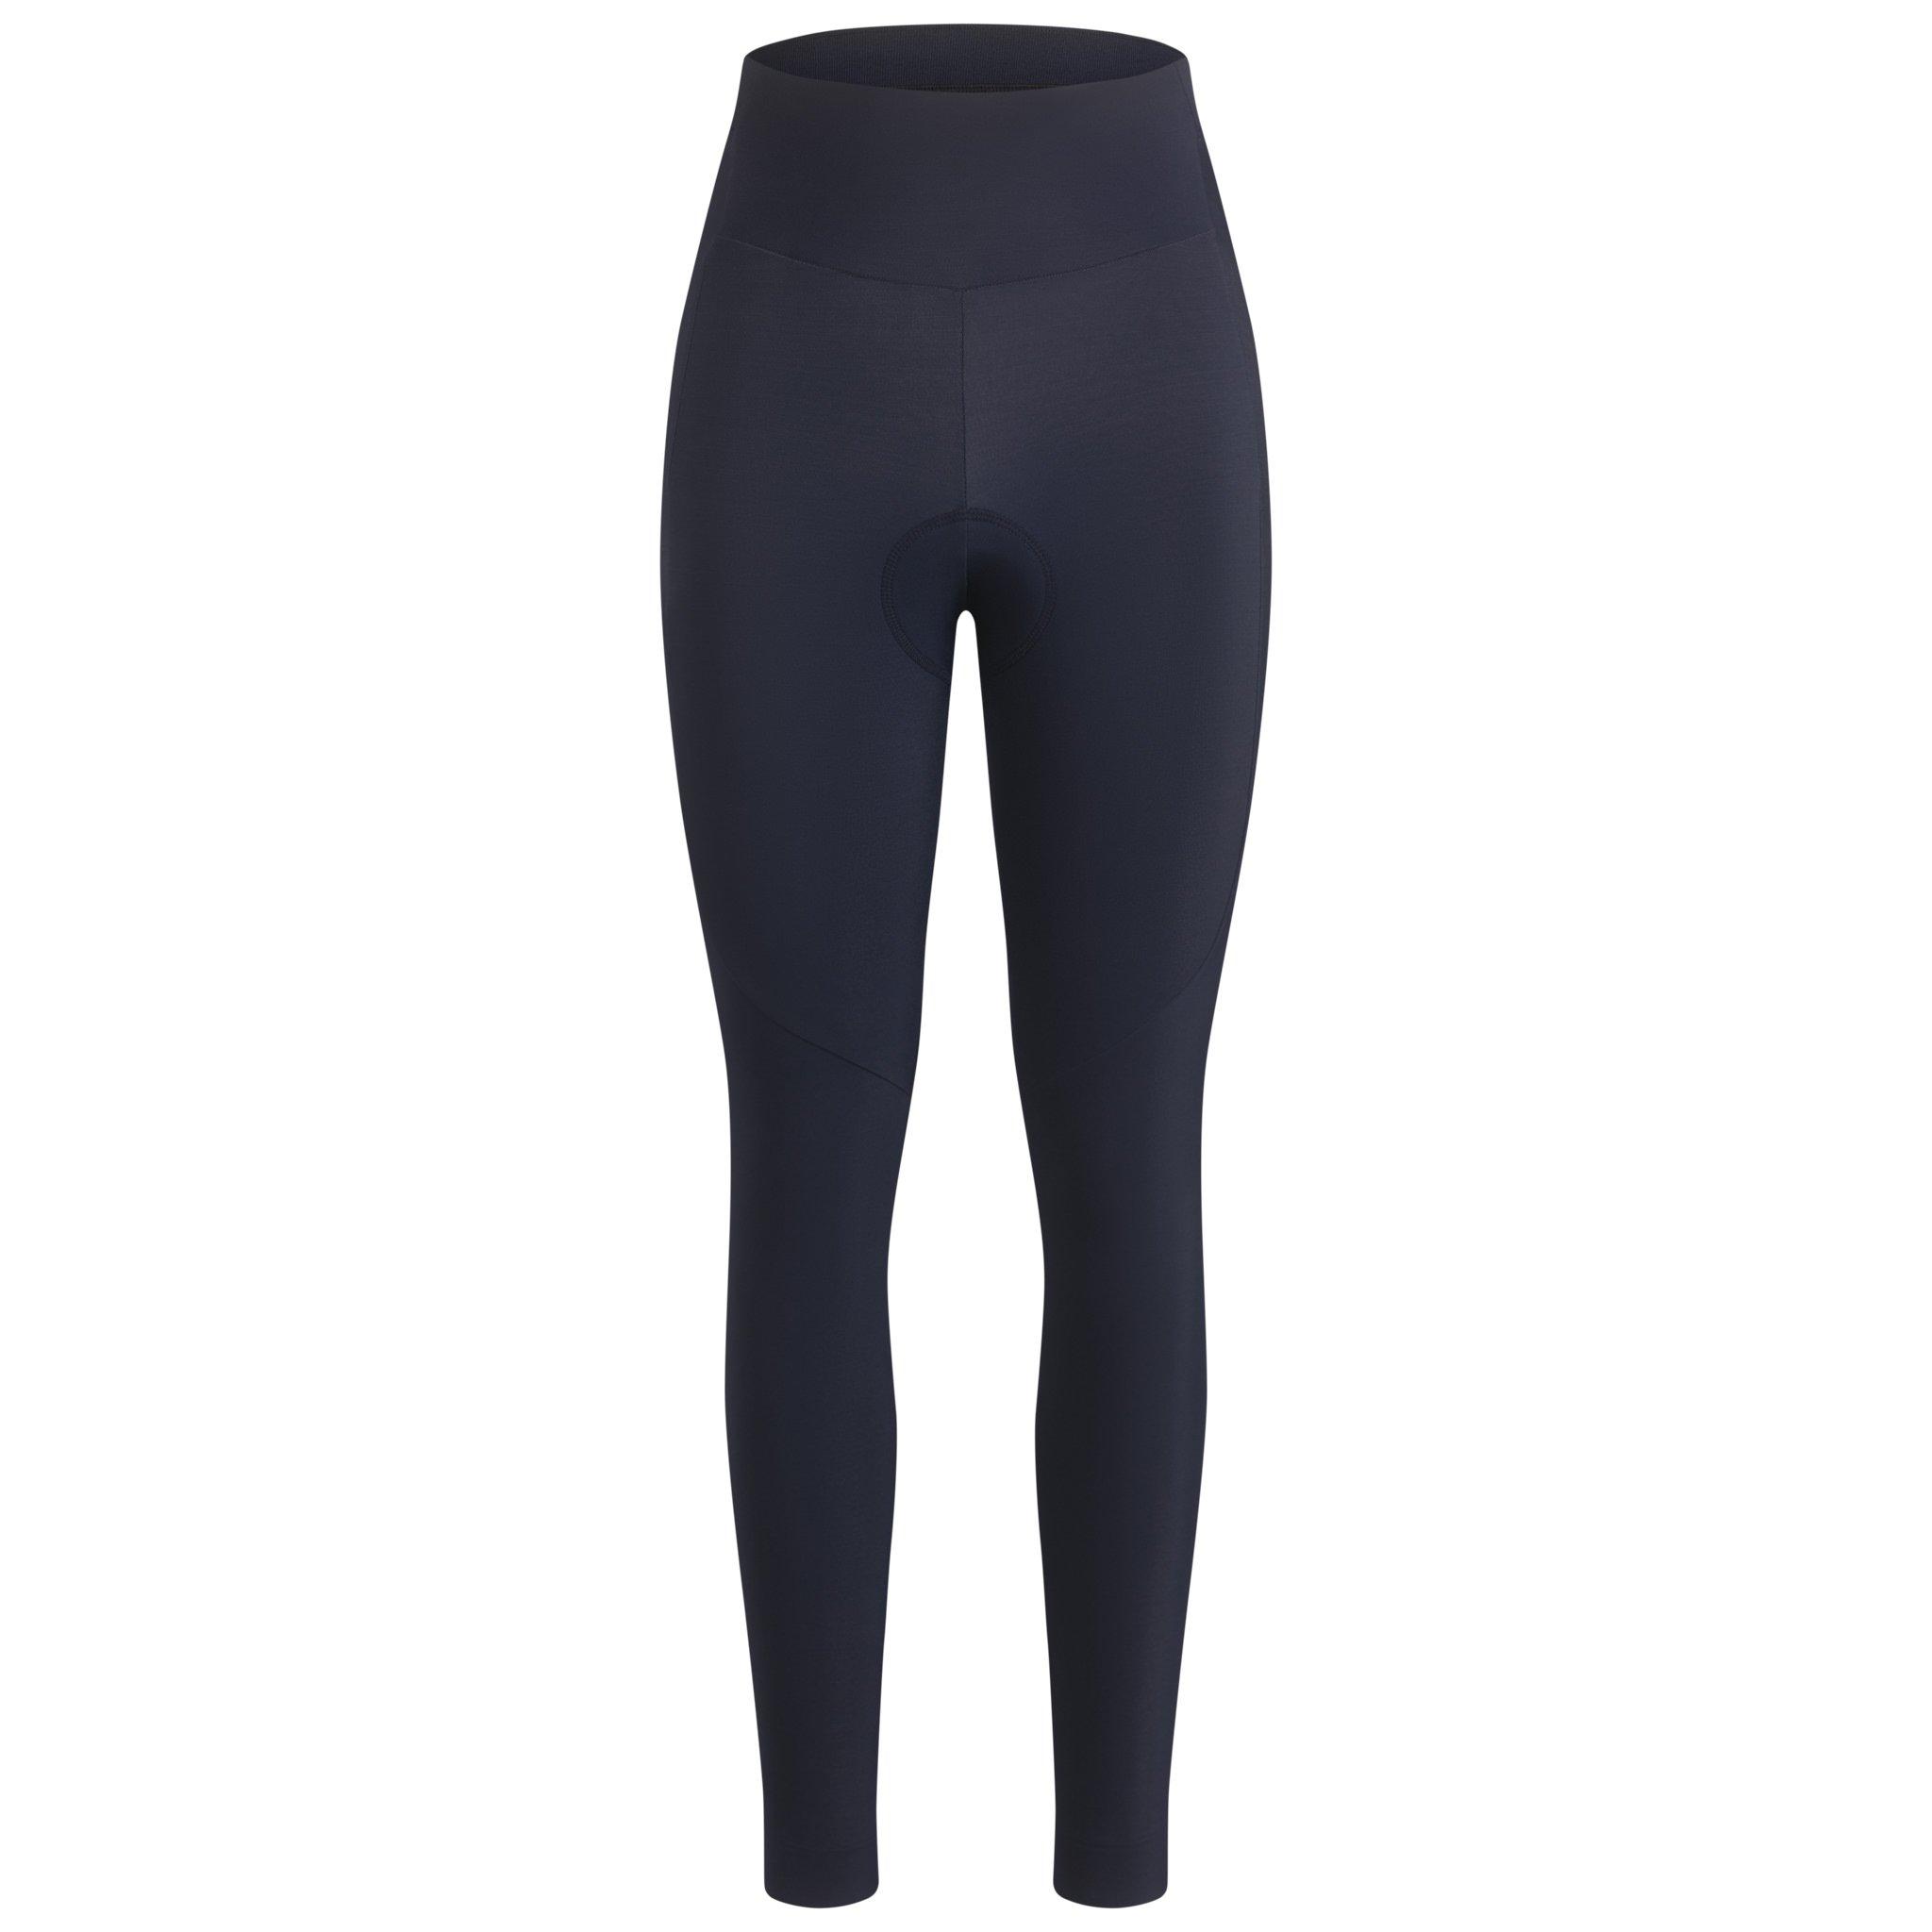 PARAGON PERFORMANCE BIANCA LADIES KNEE PATCH MOISTURE WICKING TIGHTS